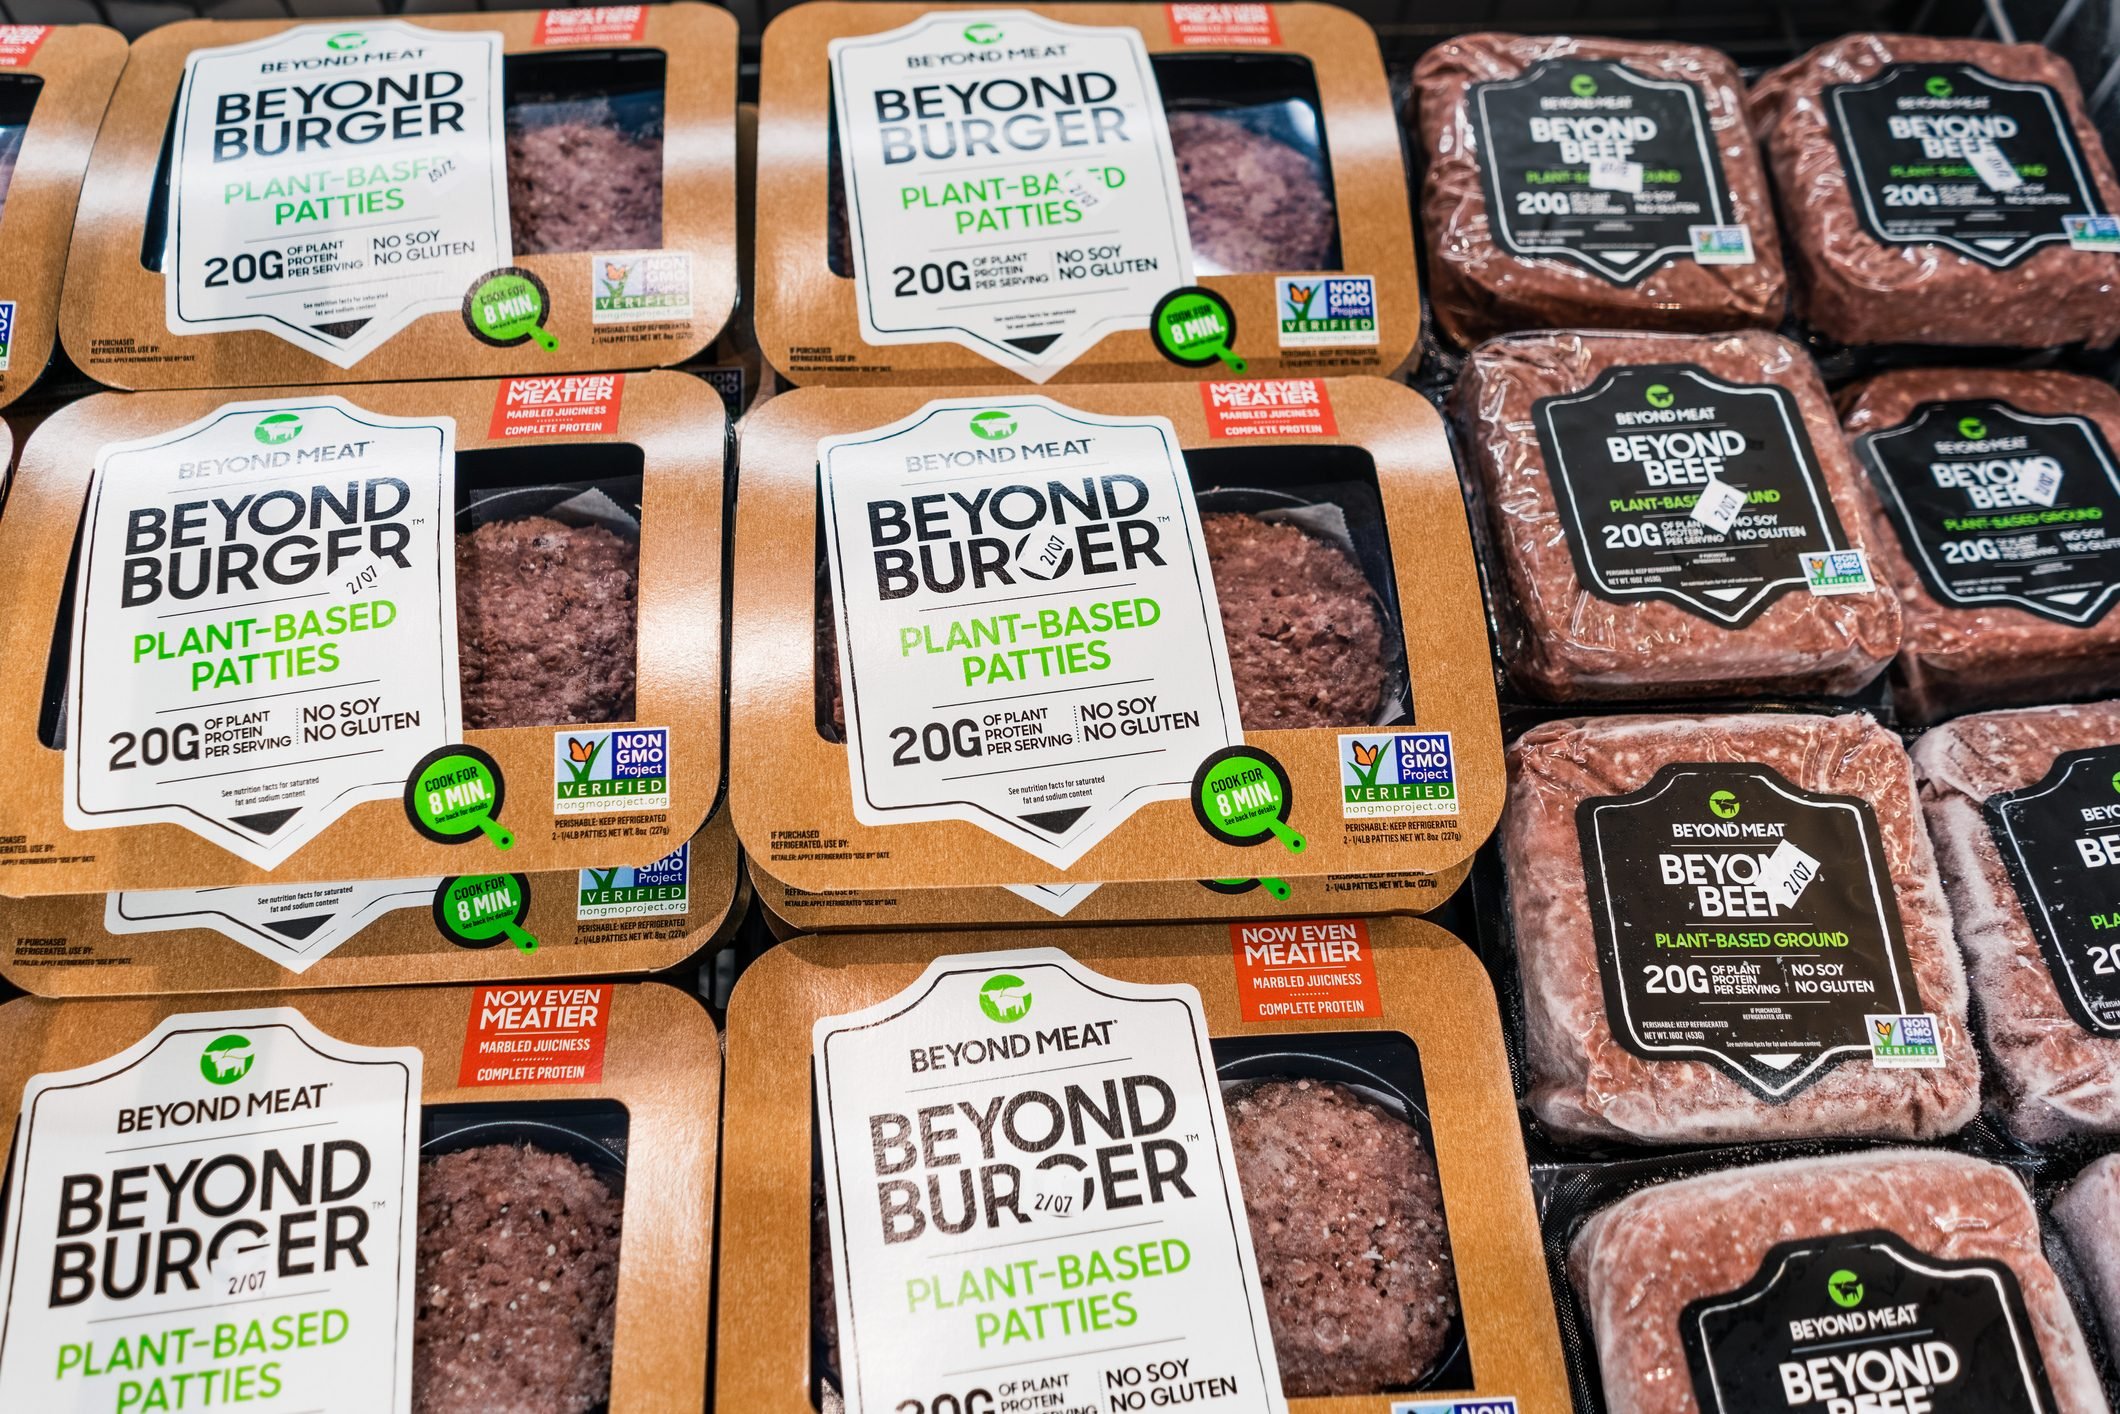 Beyond Burger and Beyond Beef packages